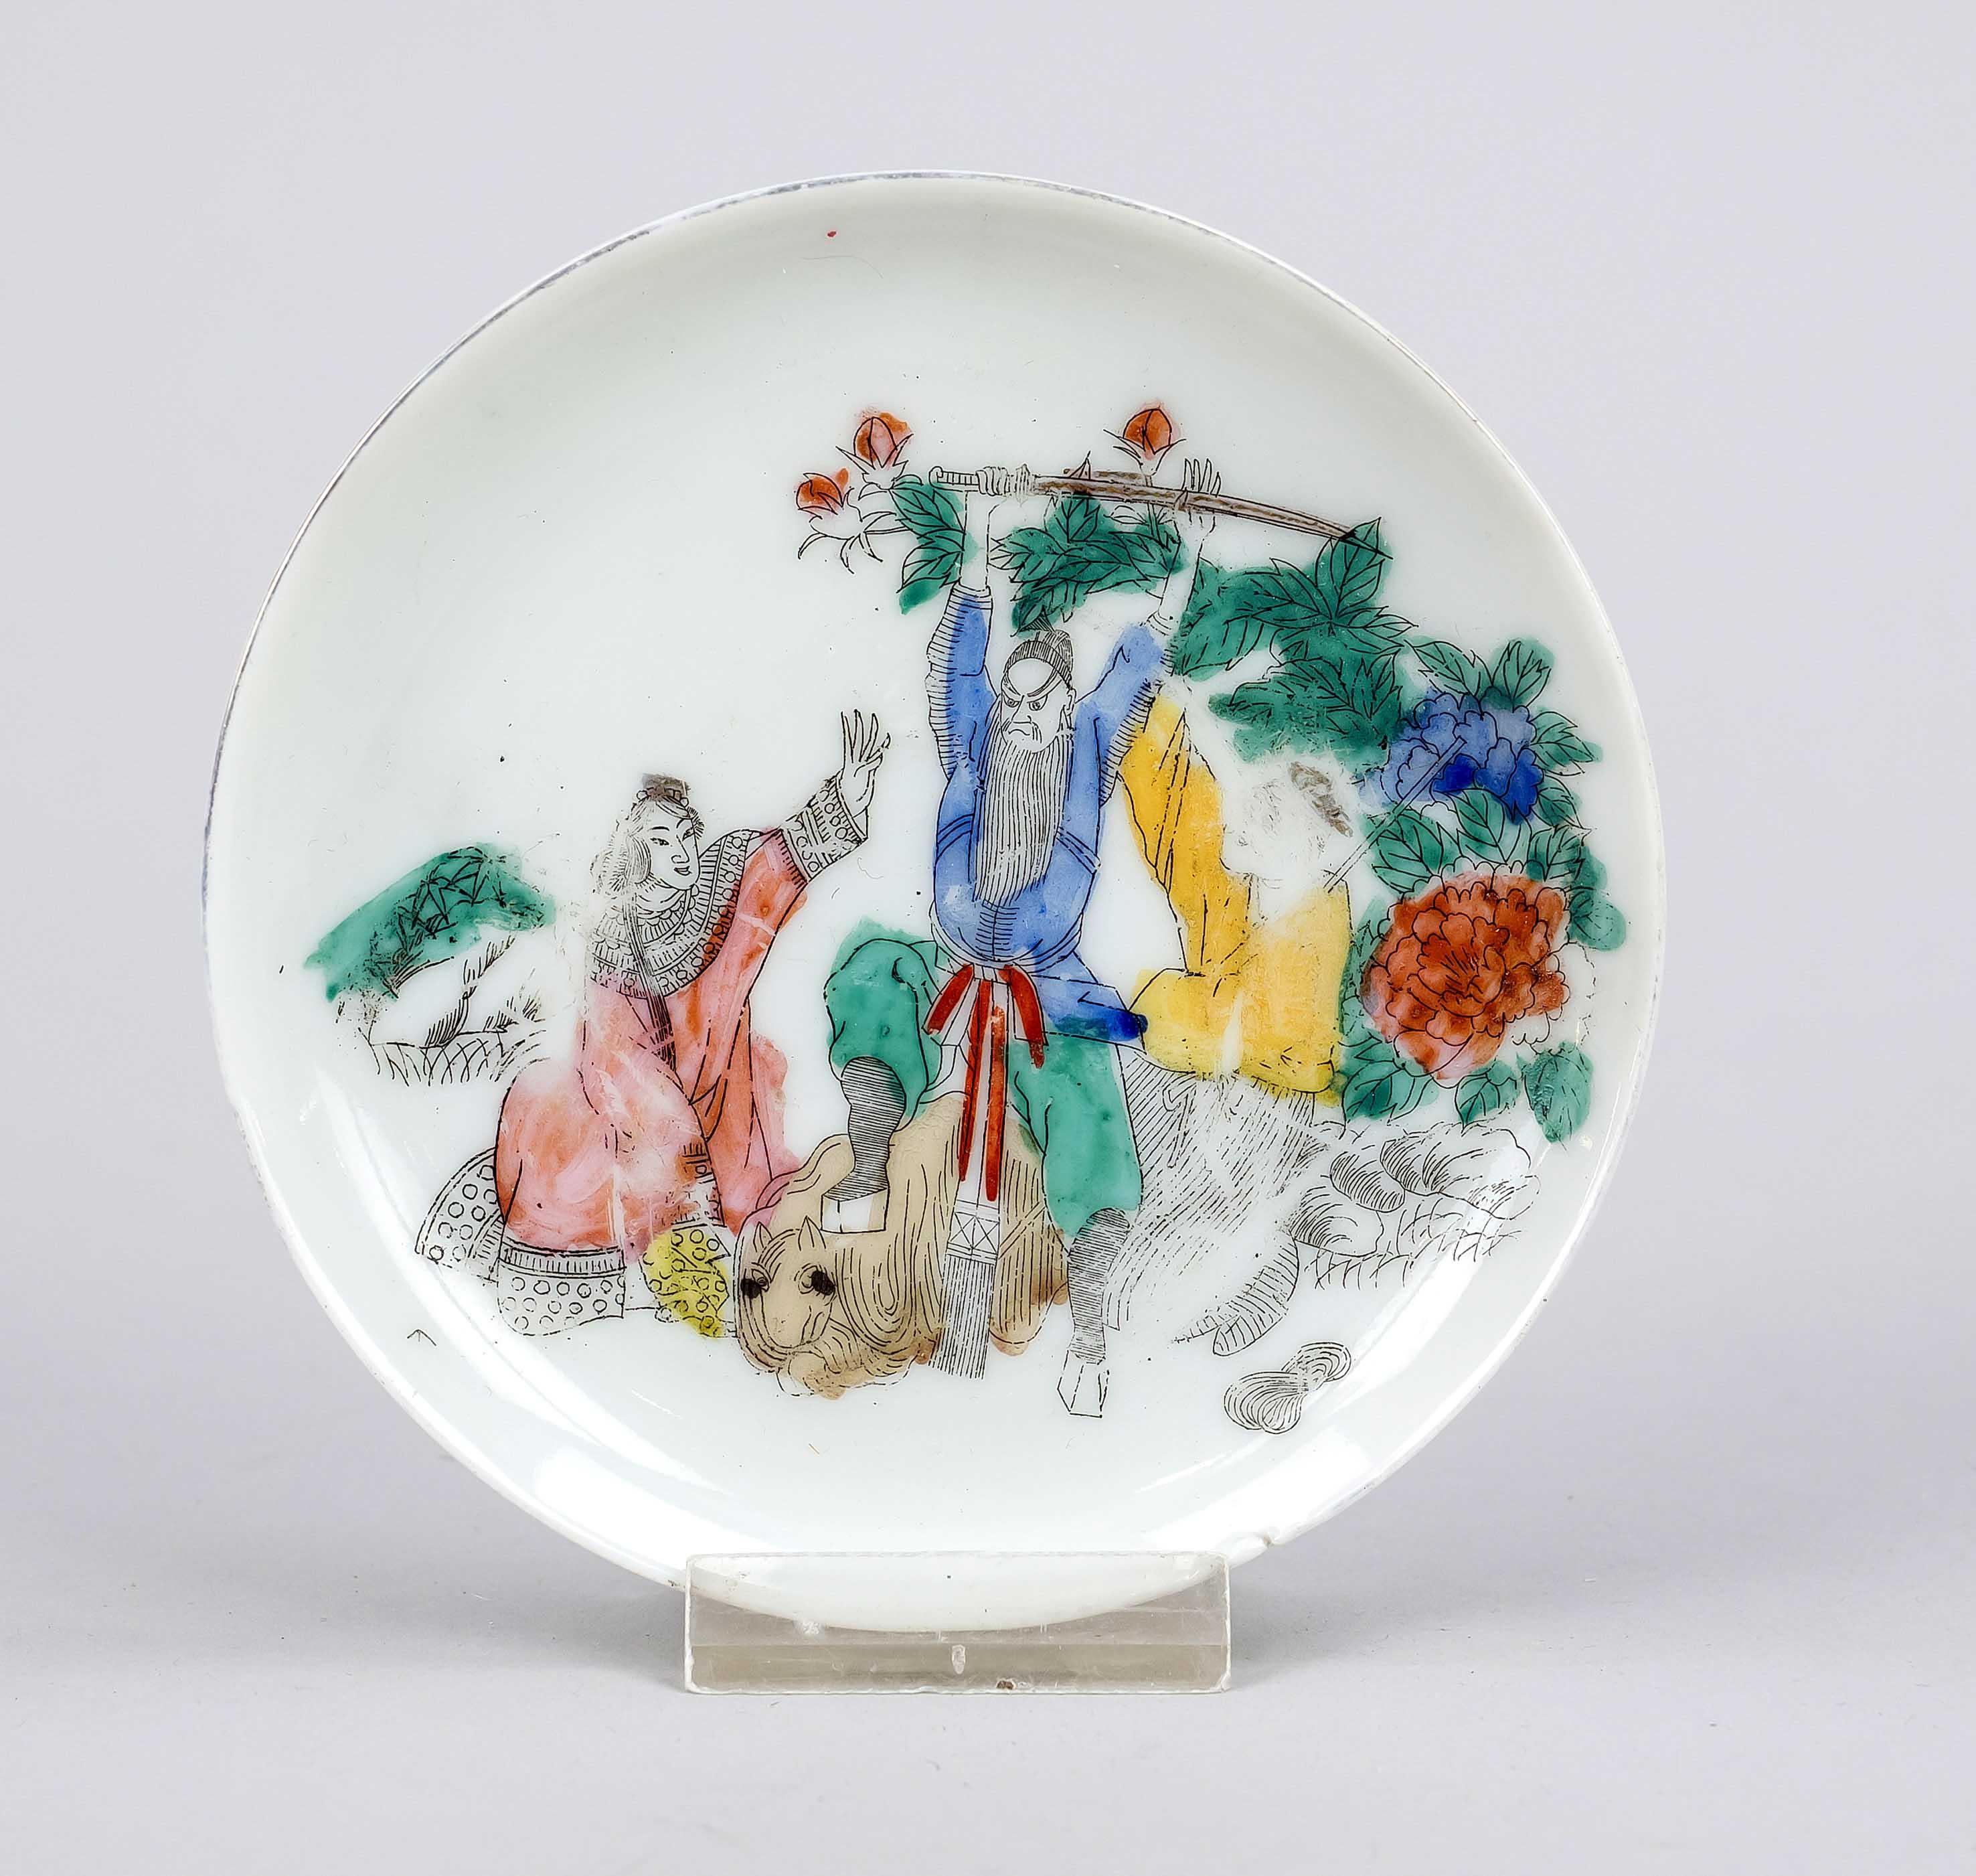 Small Peking opera plate, China, Qing dynasty(1644-1911), 19th century, porcelain with polychrome